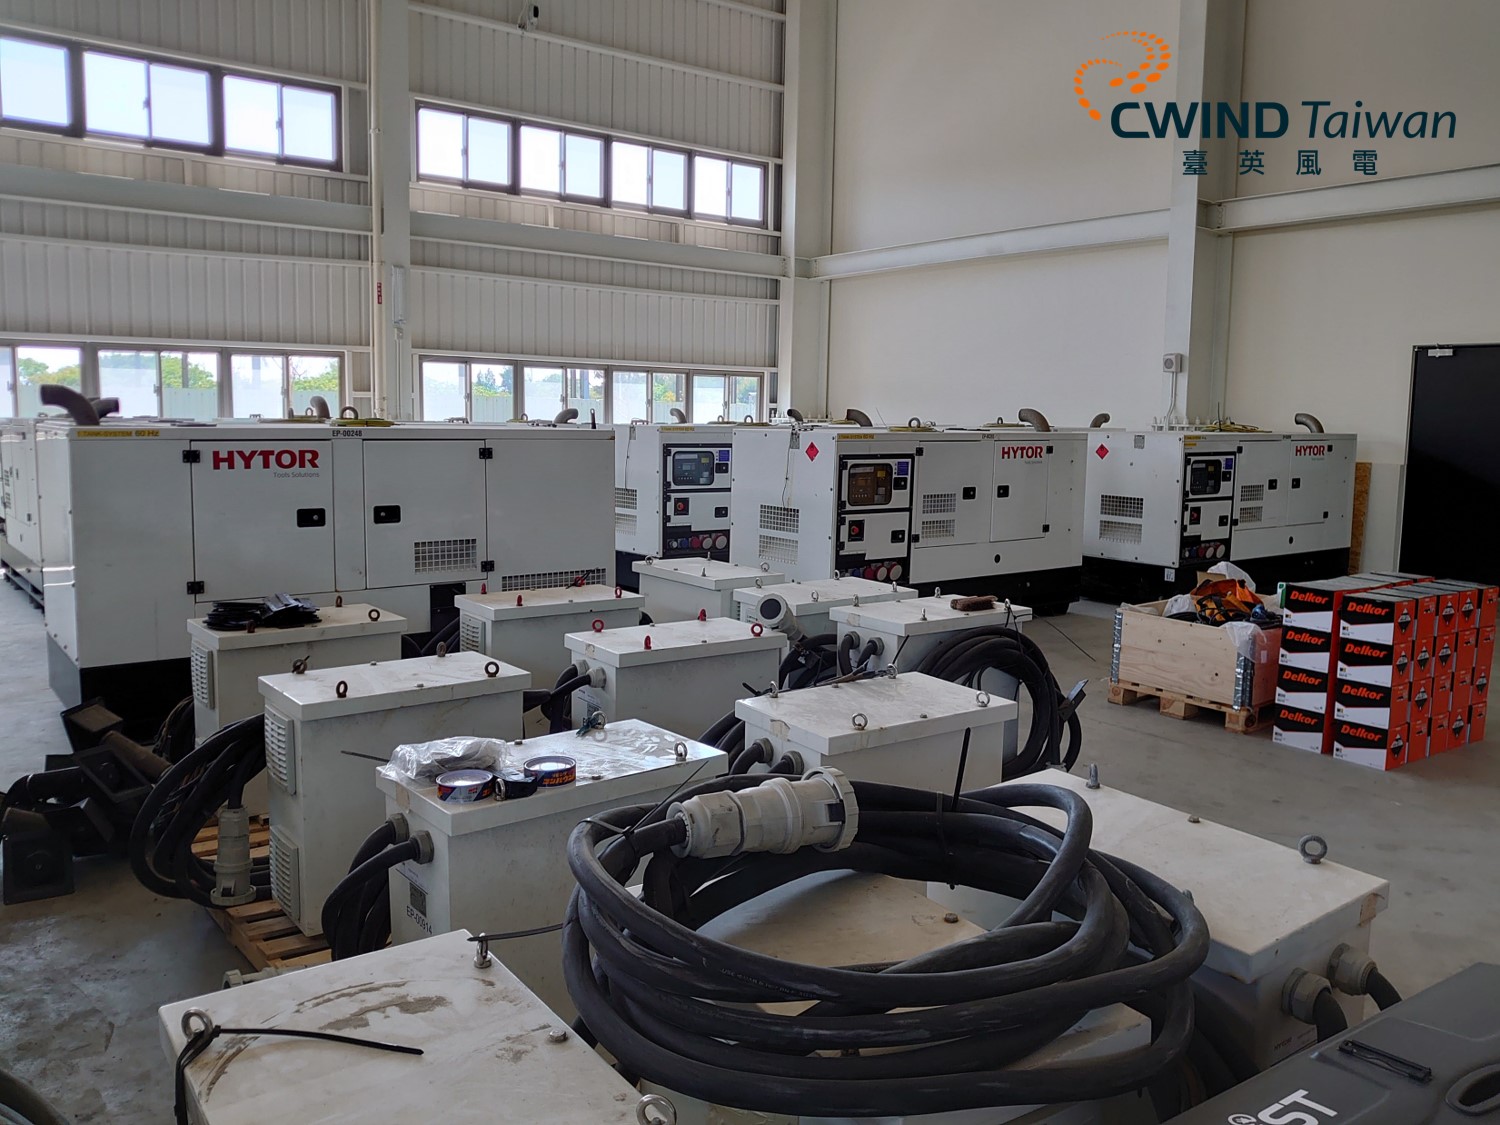 CWind-Taiwan-and-HYTOR-Bring-Temporary-Power-Solutions-to-Taiwan